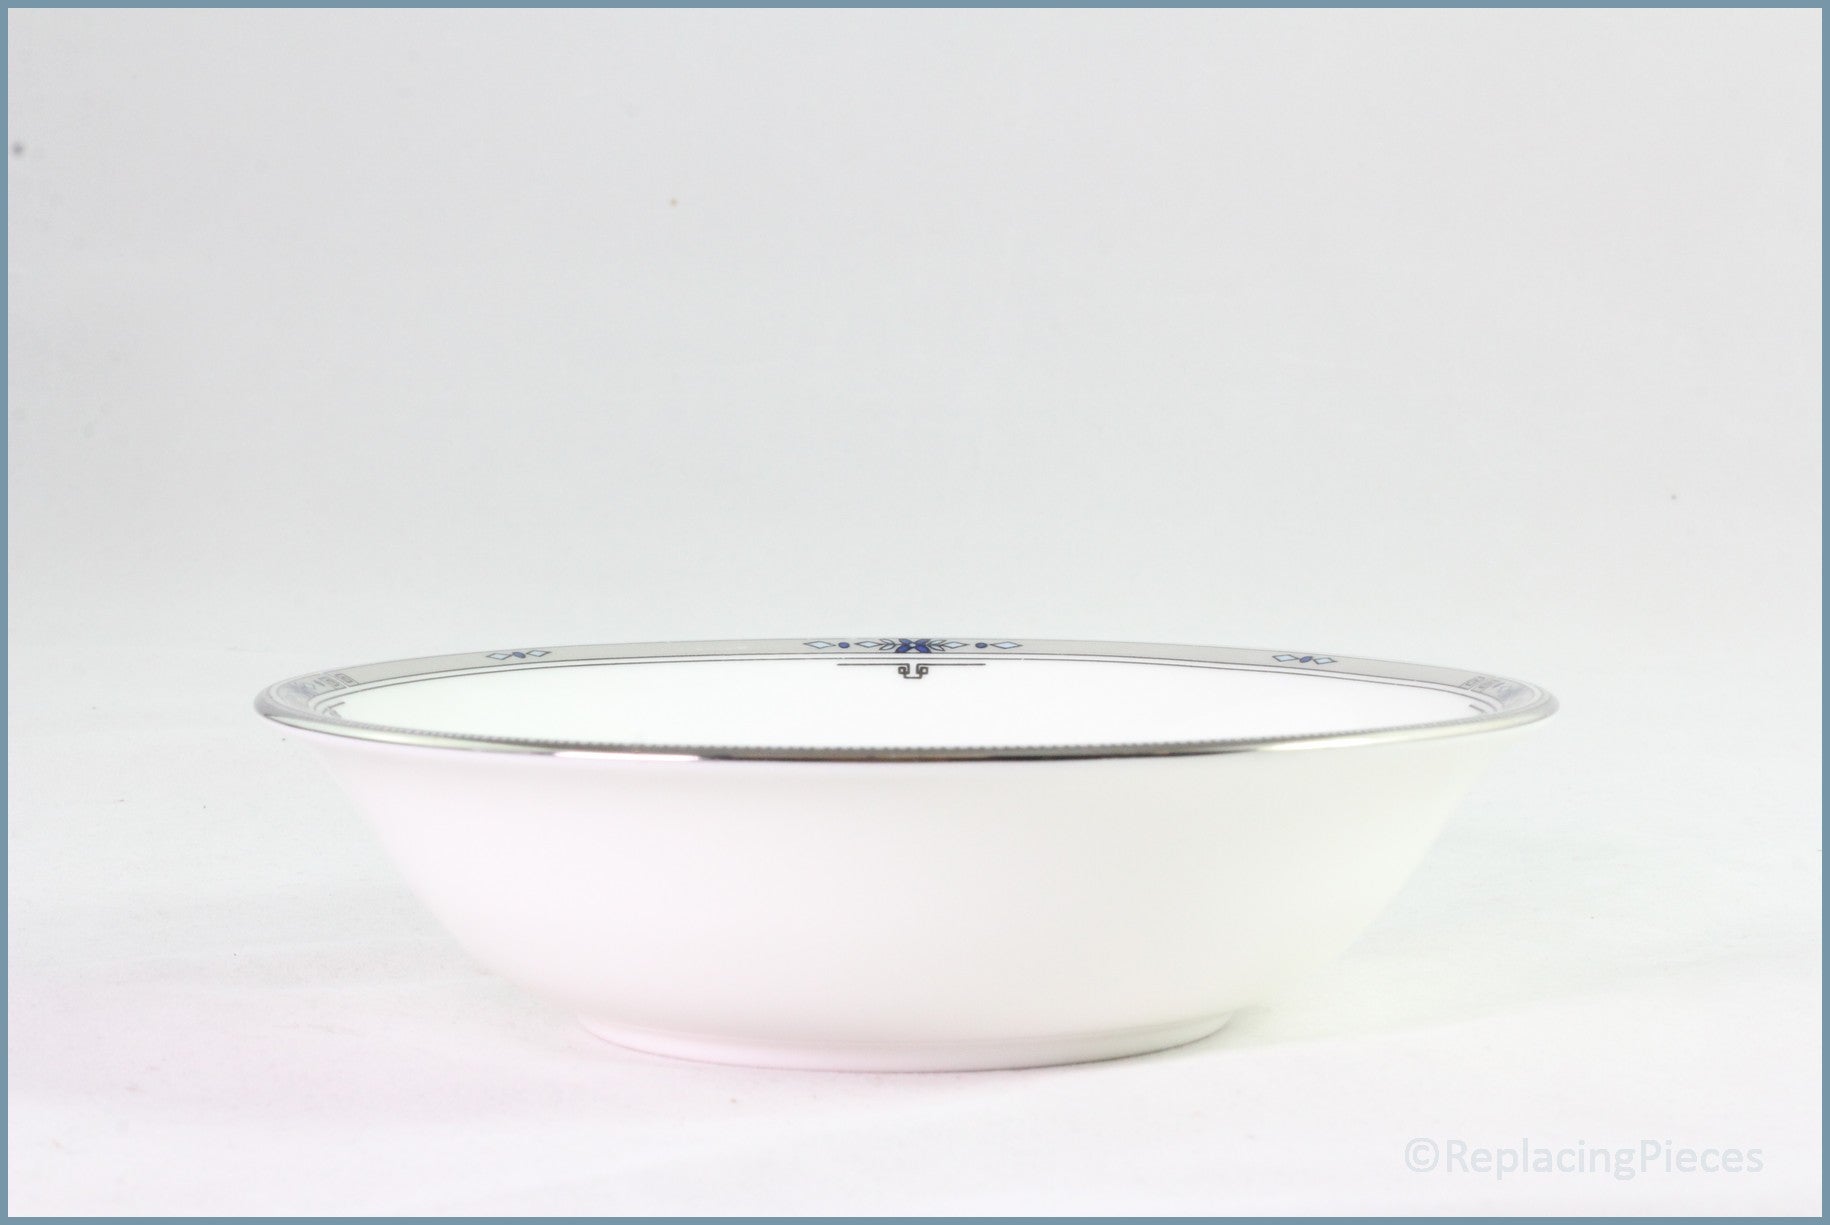 Wedgwood - Amherst - Cereal Bowl